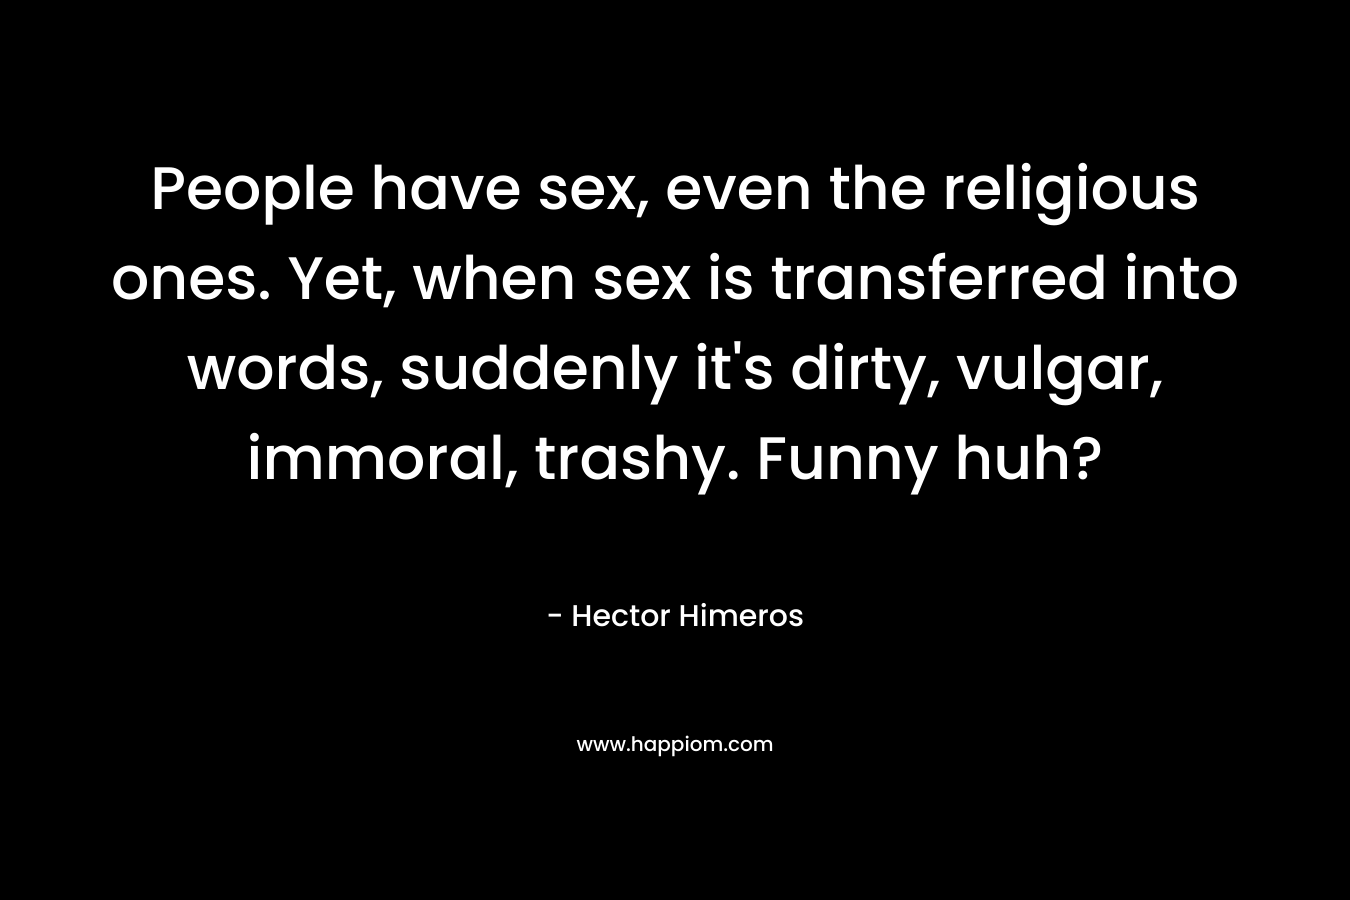 People have sex, even the religious ones. Yet, when sex is transferred into words, suddenly it's dirty, vulgar, immoral, trashy. Funny huh?